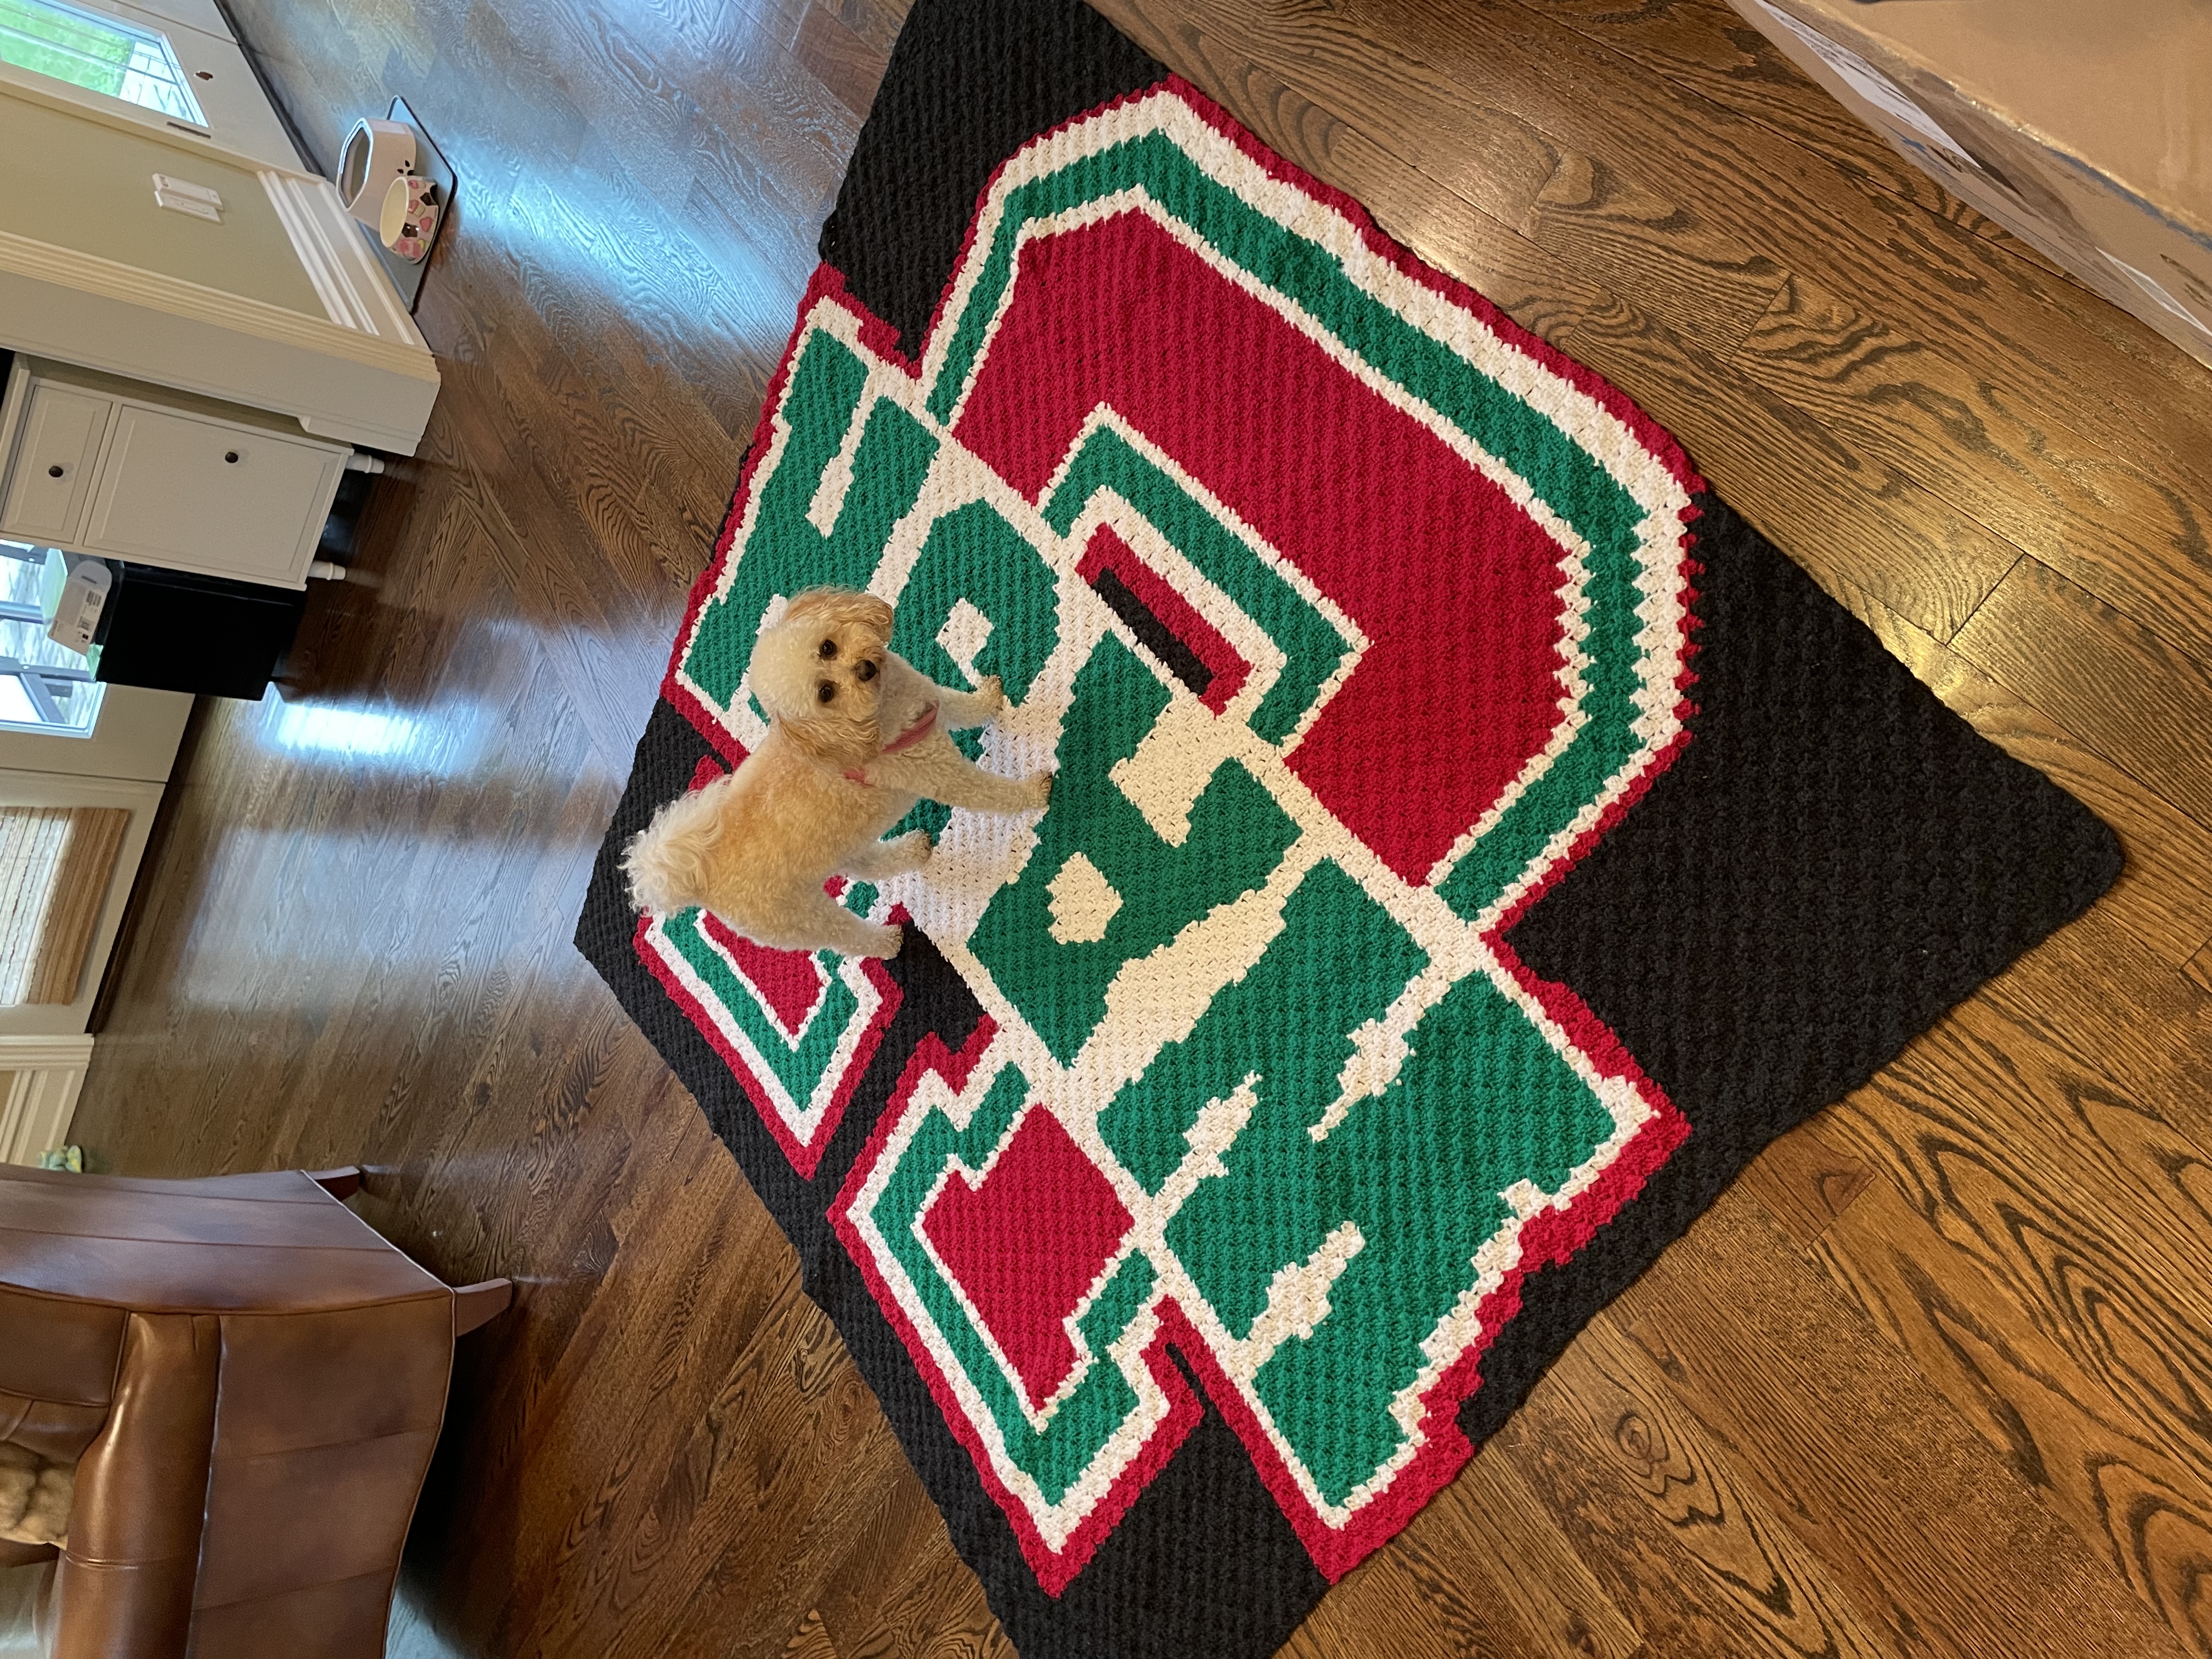 A large WashU blanket for my brother. This blanket was made with the C2C (corner to corner) technique and took several months!